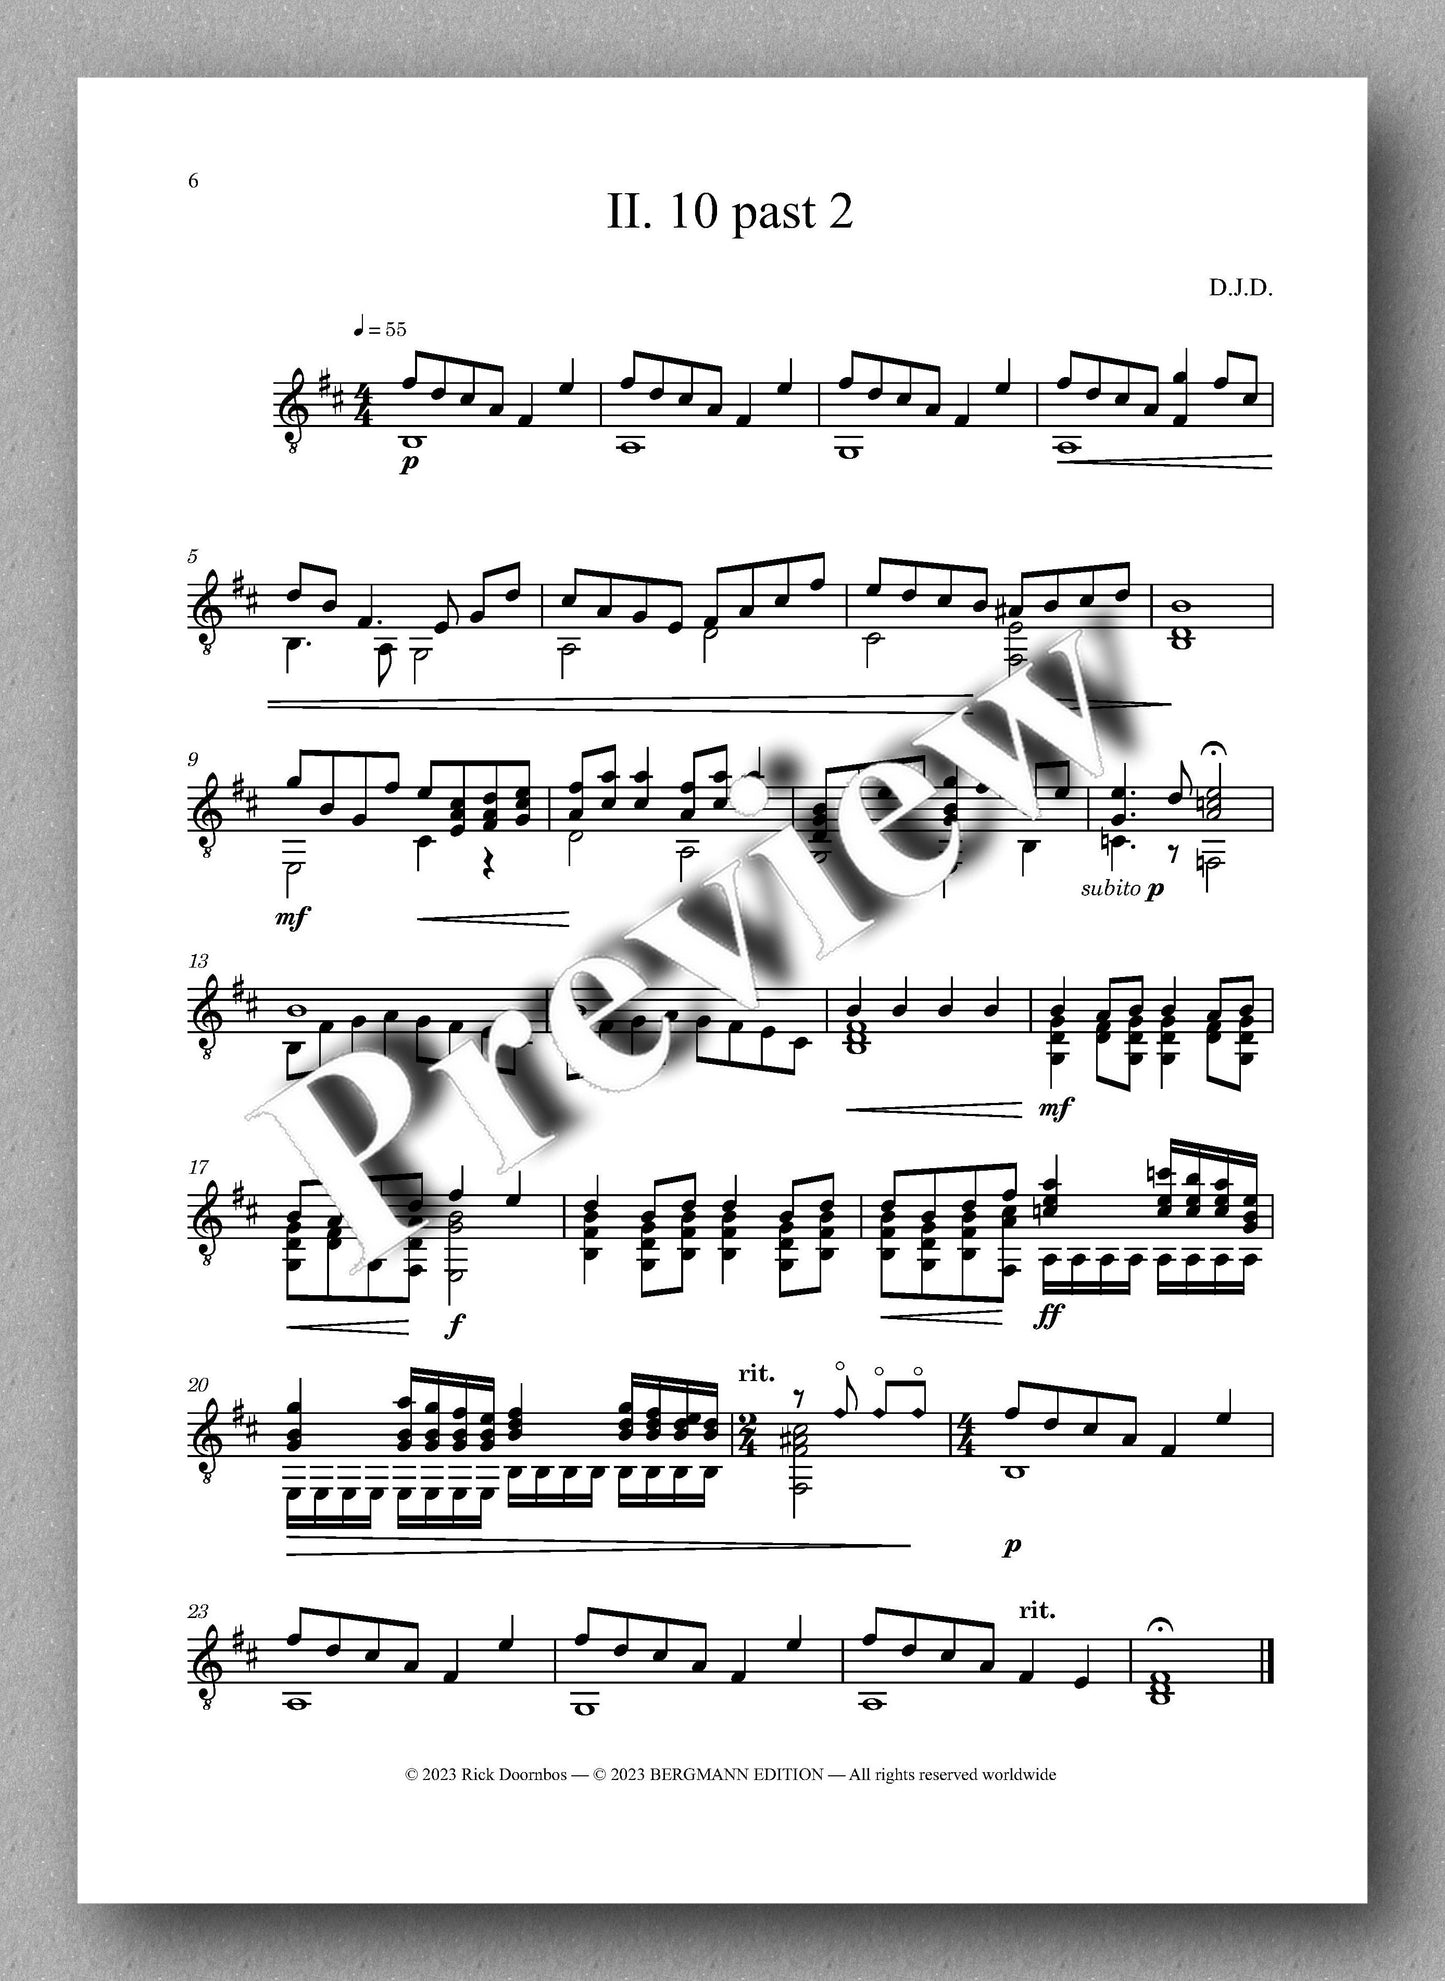 Suite No. 2 by Rick Doornbos - preview of the music score 2